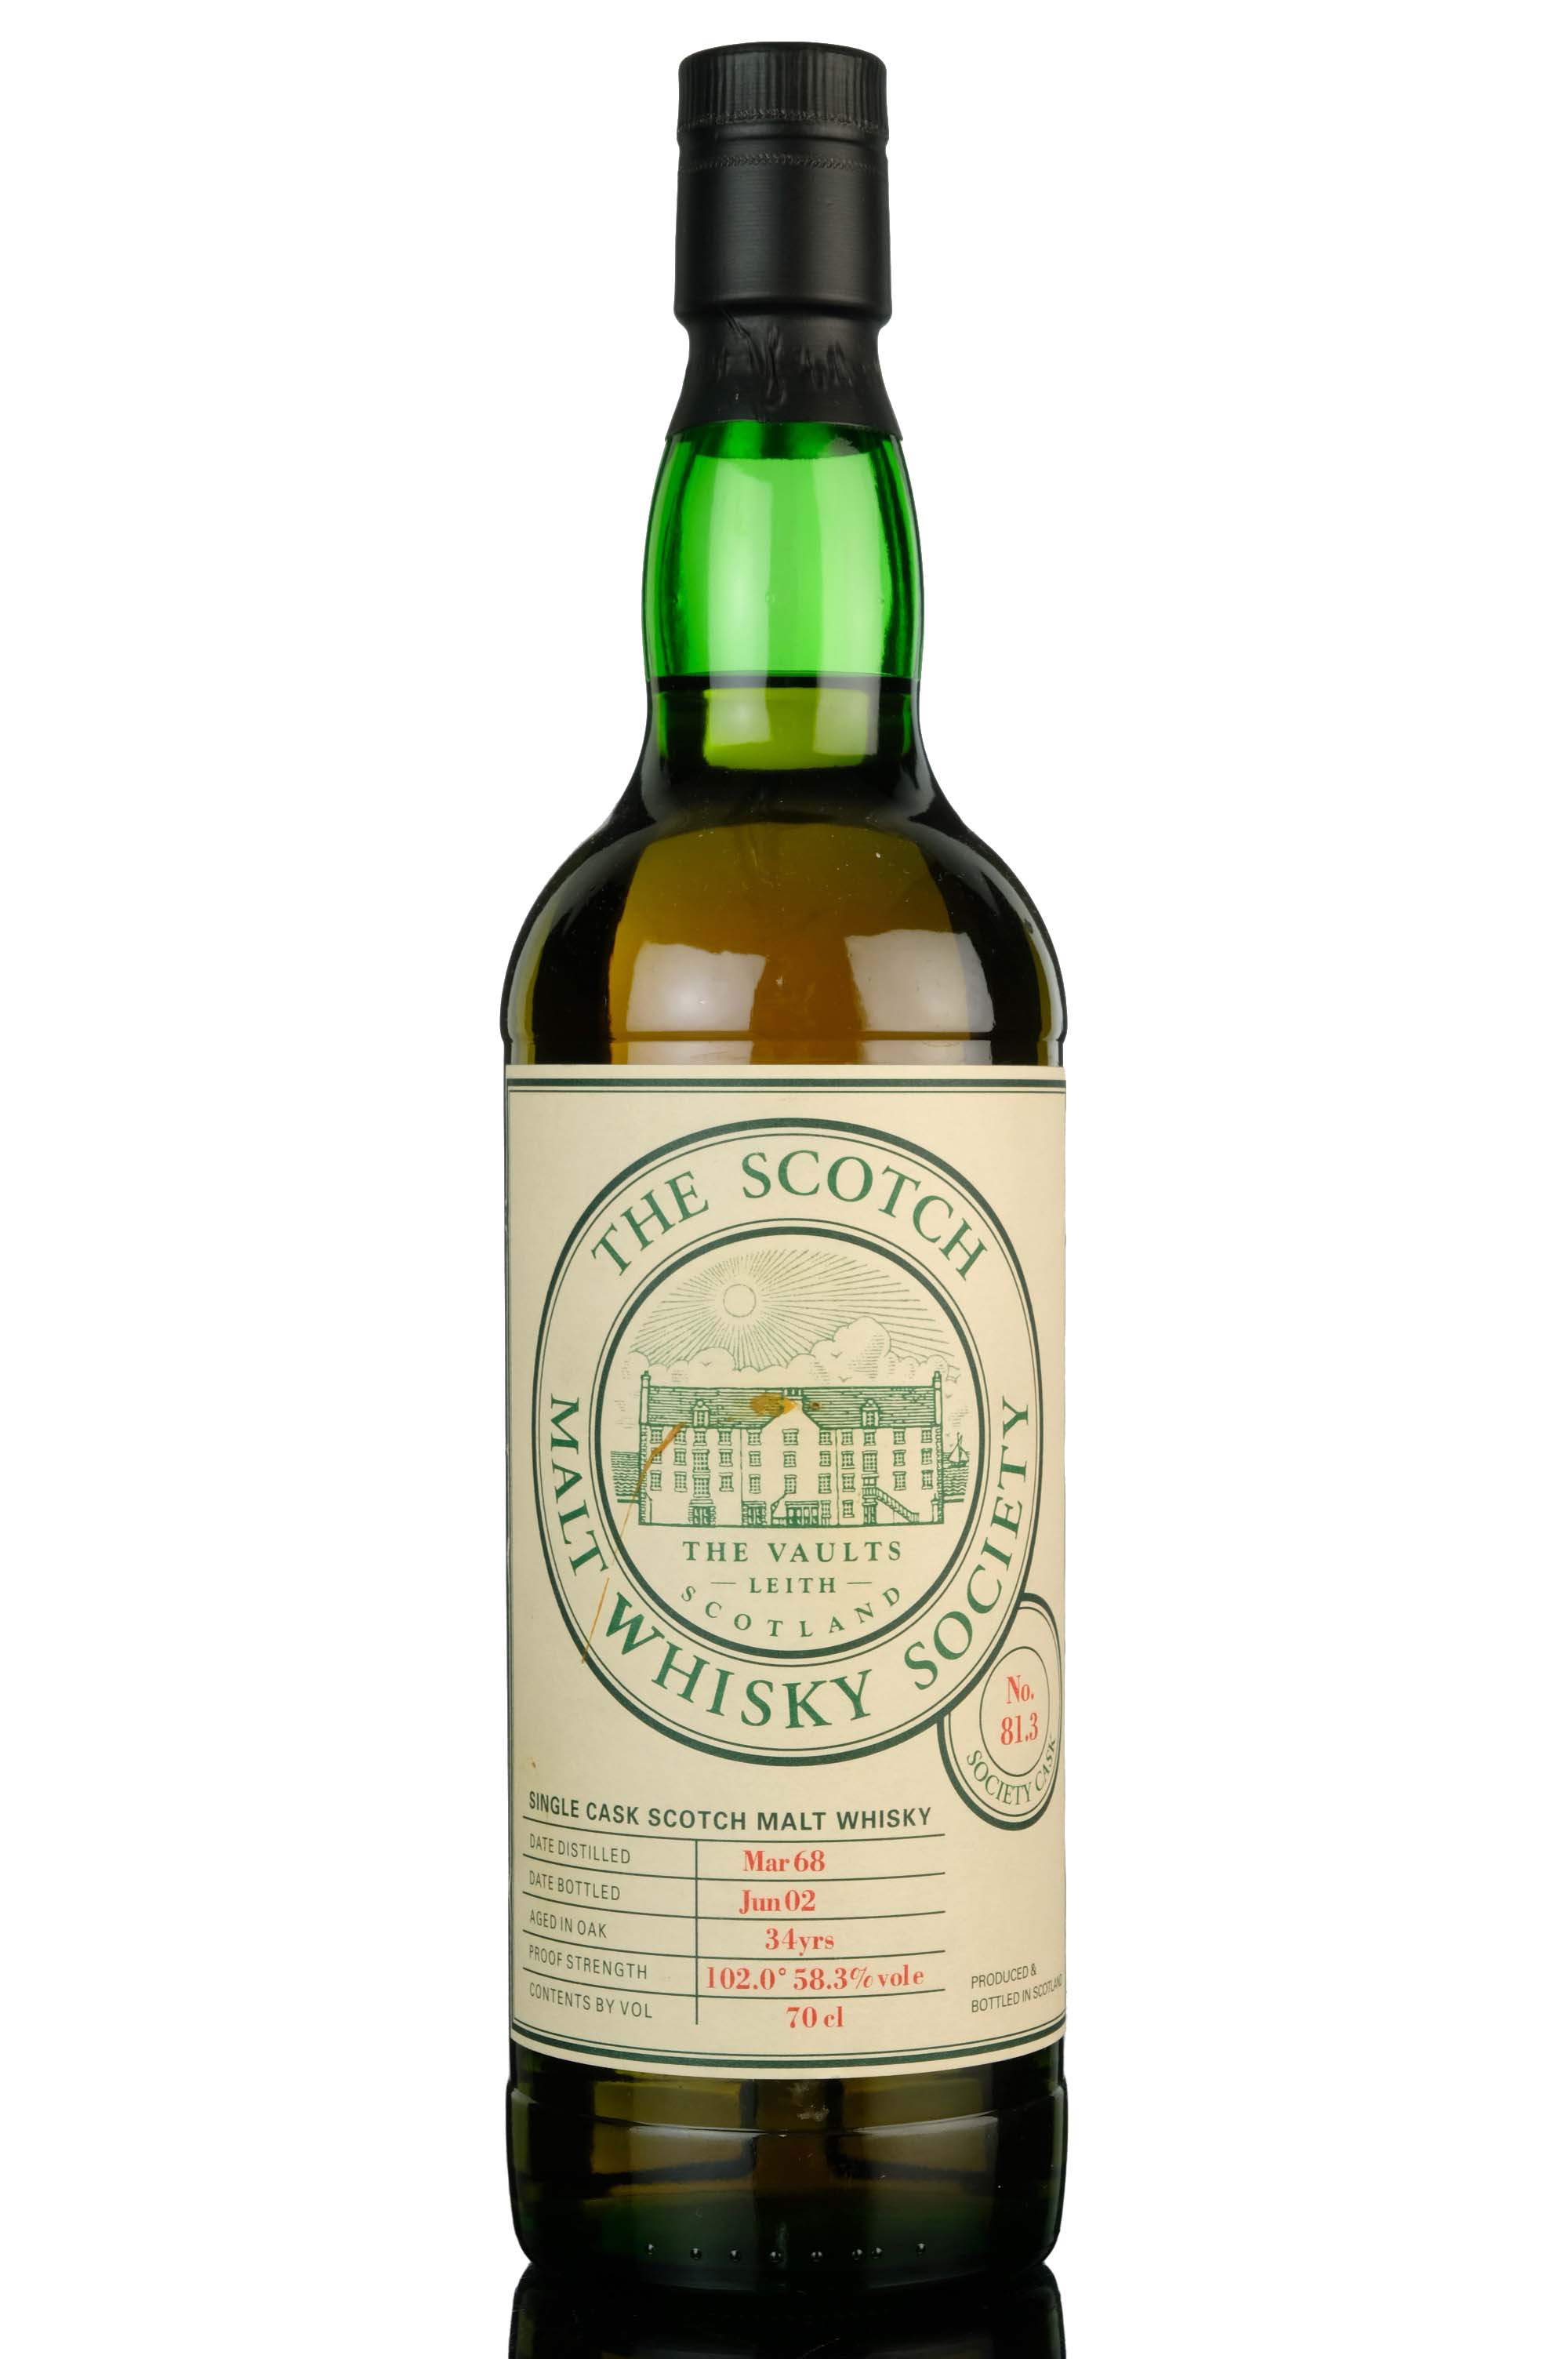 Glen Keith 1968-2002 - 34 Year Old - SMWS 81.3